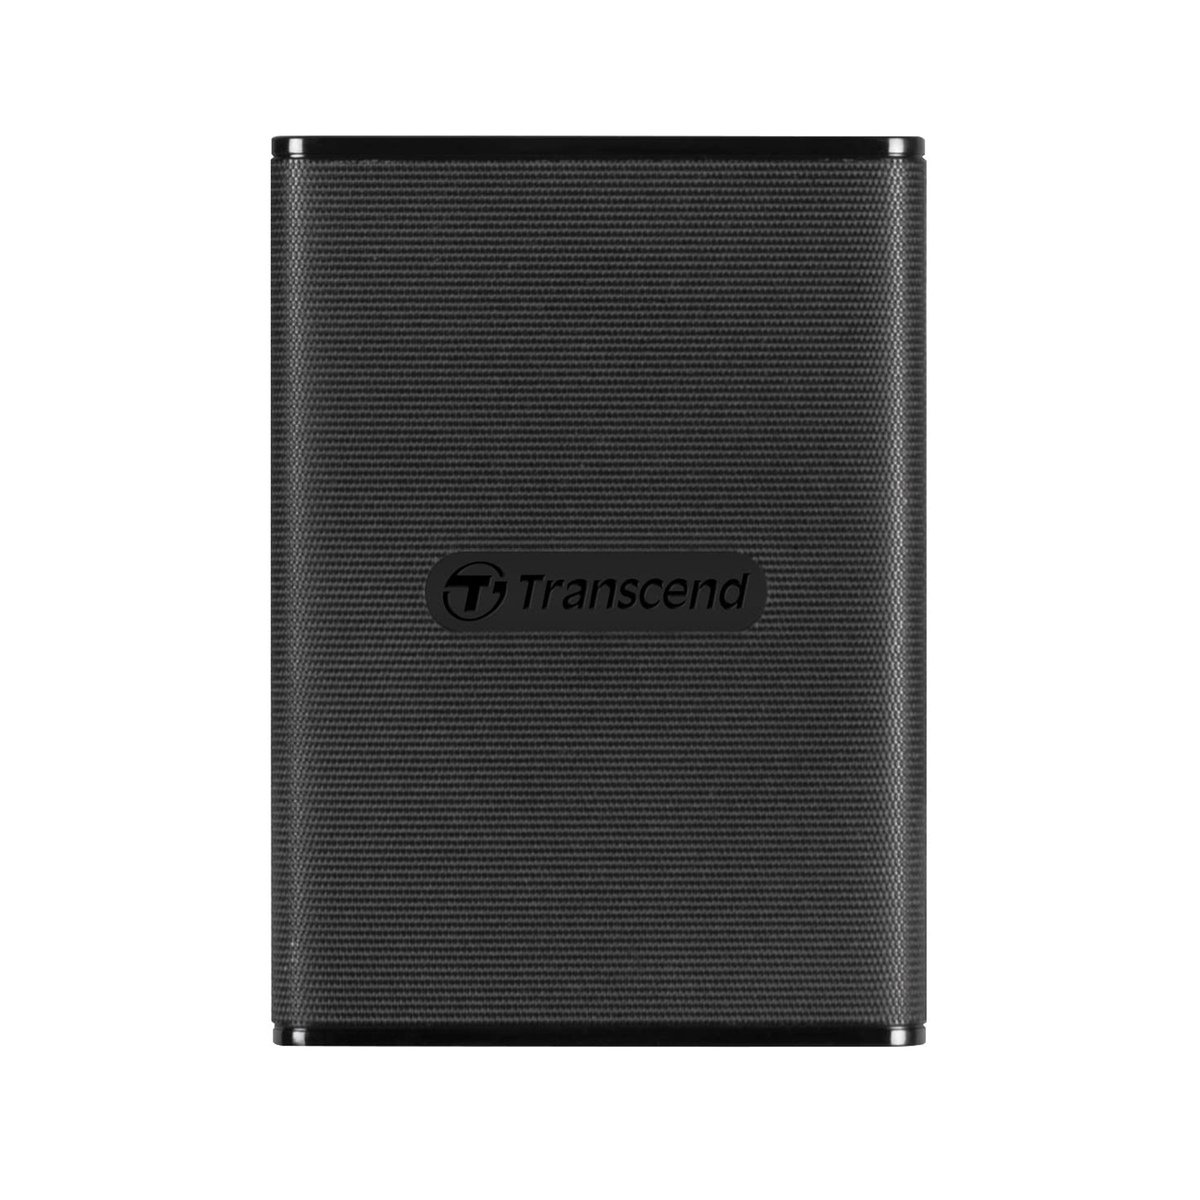 Transcend 500GB USB 3.1 Gen 2 USB Type-C ESD270C Portable Solid State Drive